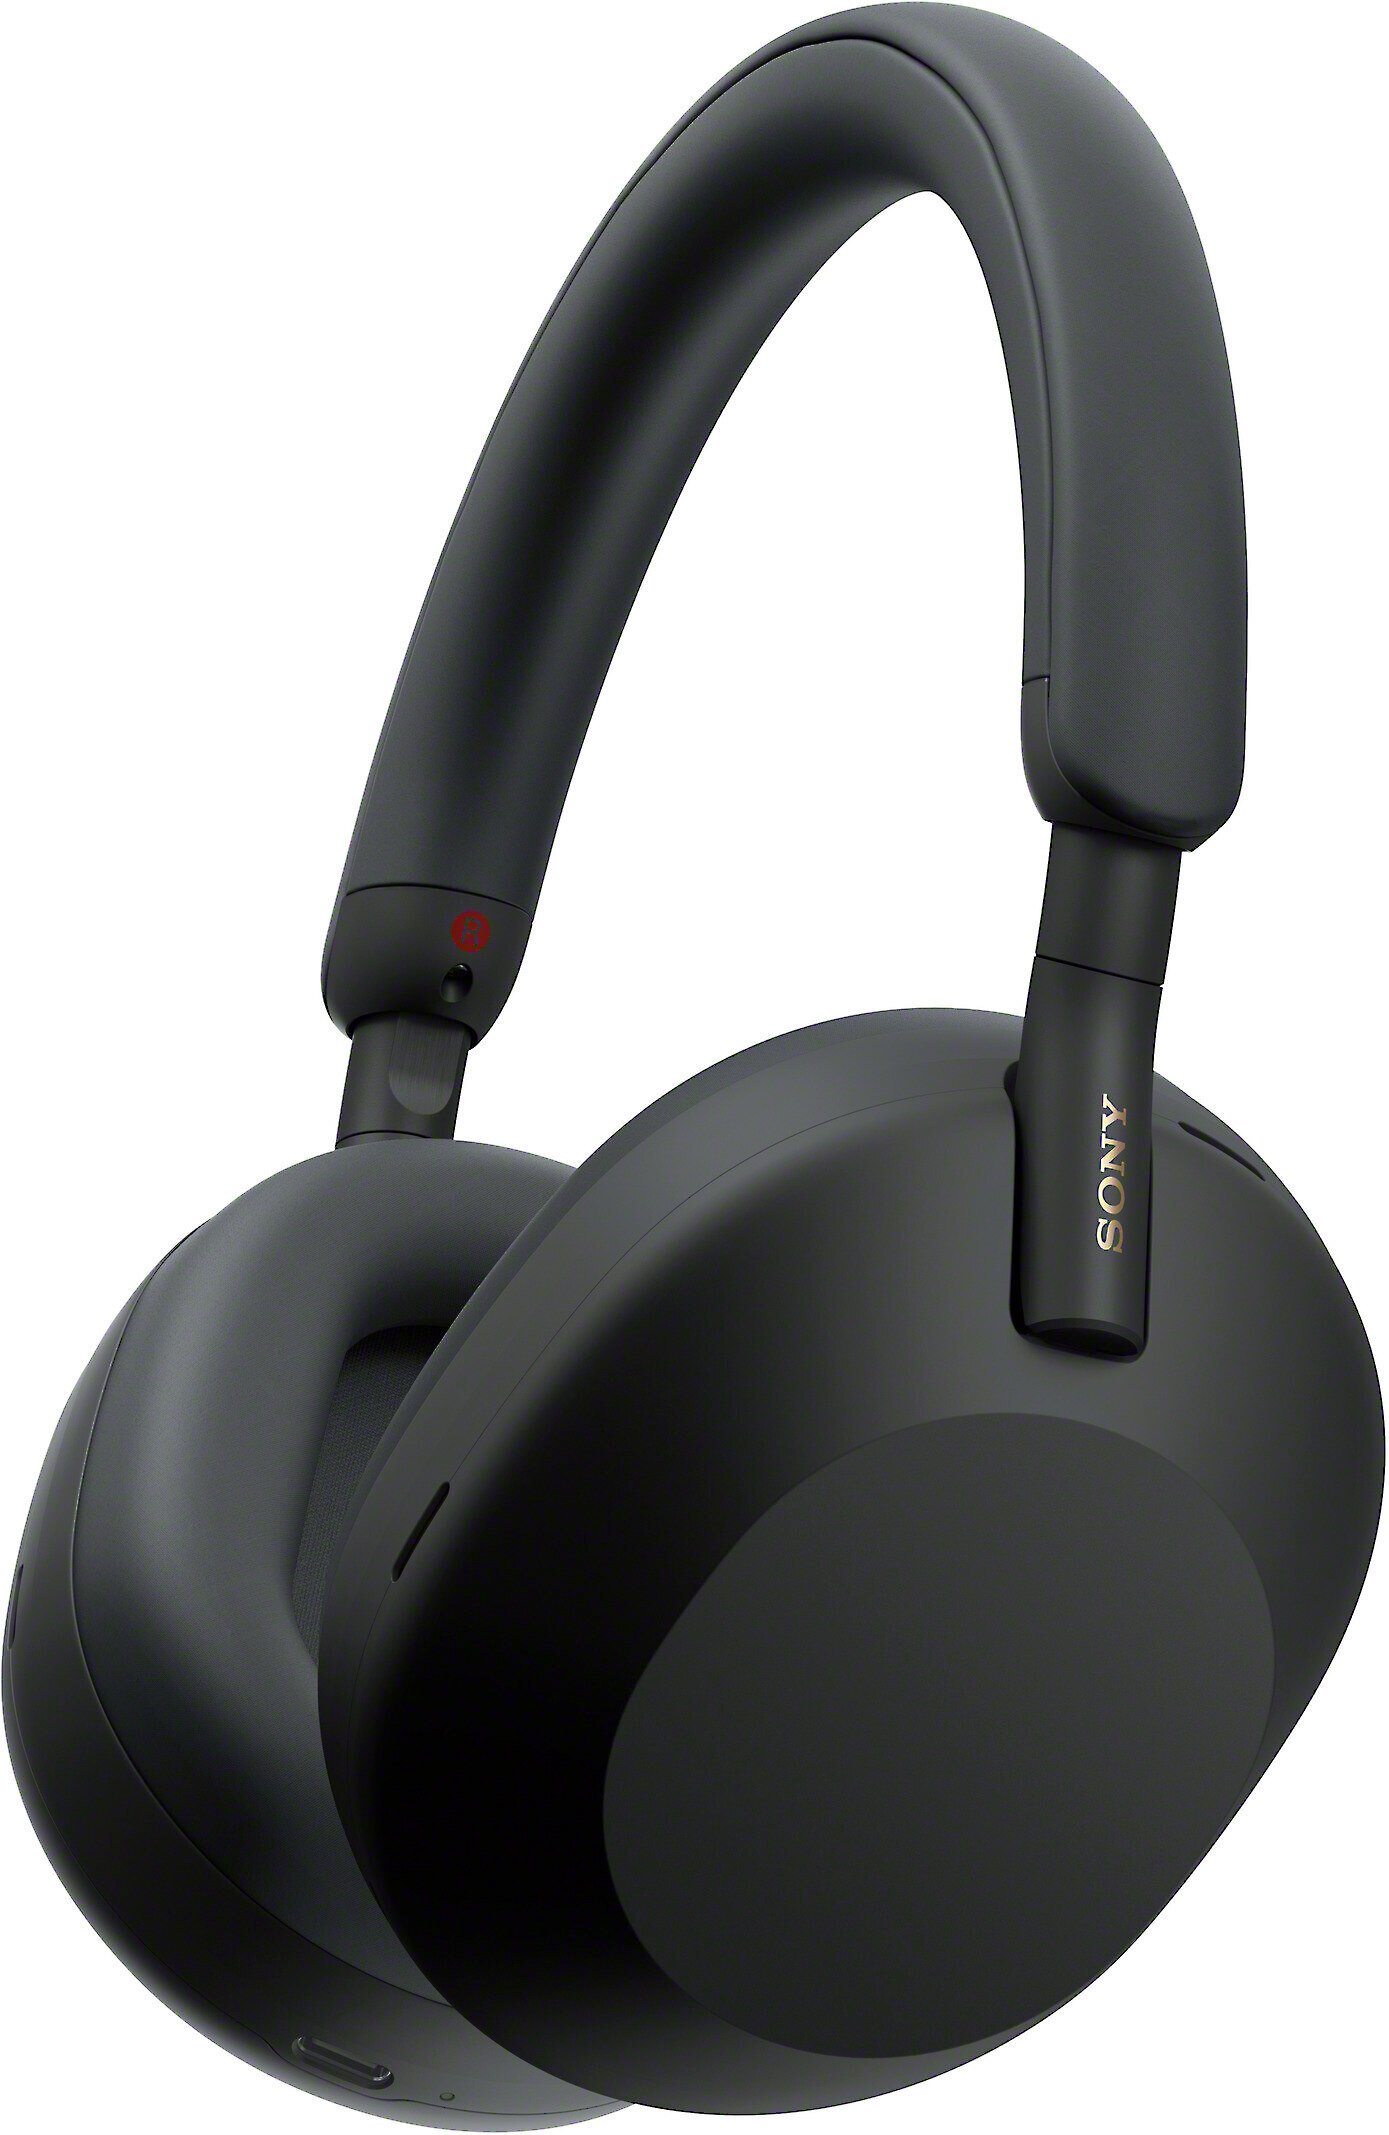 Customer Reviews: Sony WH-1000XM5 (Black) Over-ear Bluetooth